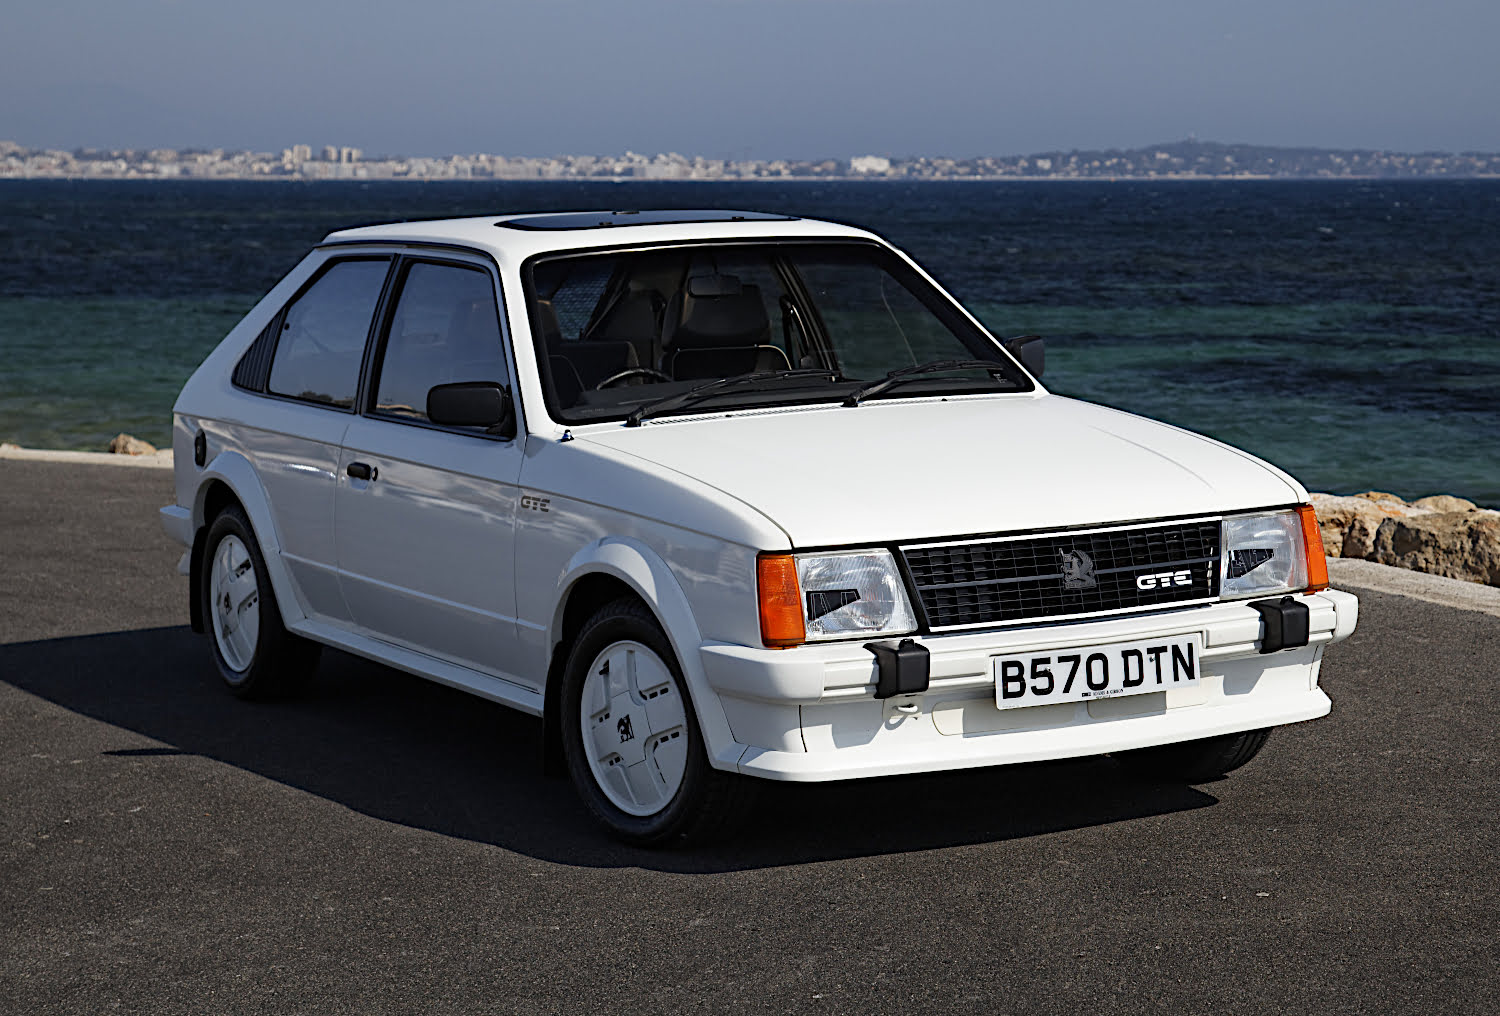 Cars Of The Vauxhall Heritage Collection: Vauxhall Astra GTE Mk1